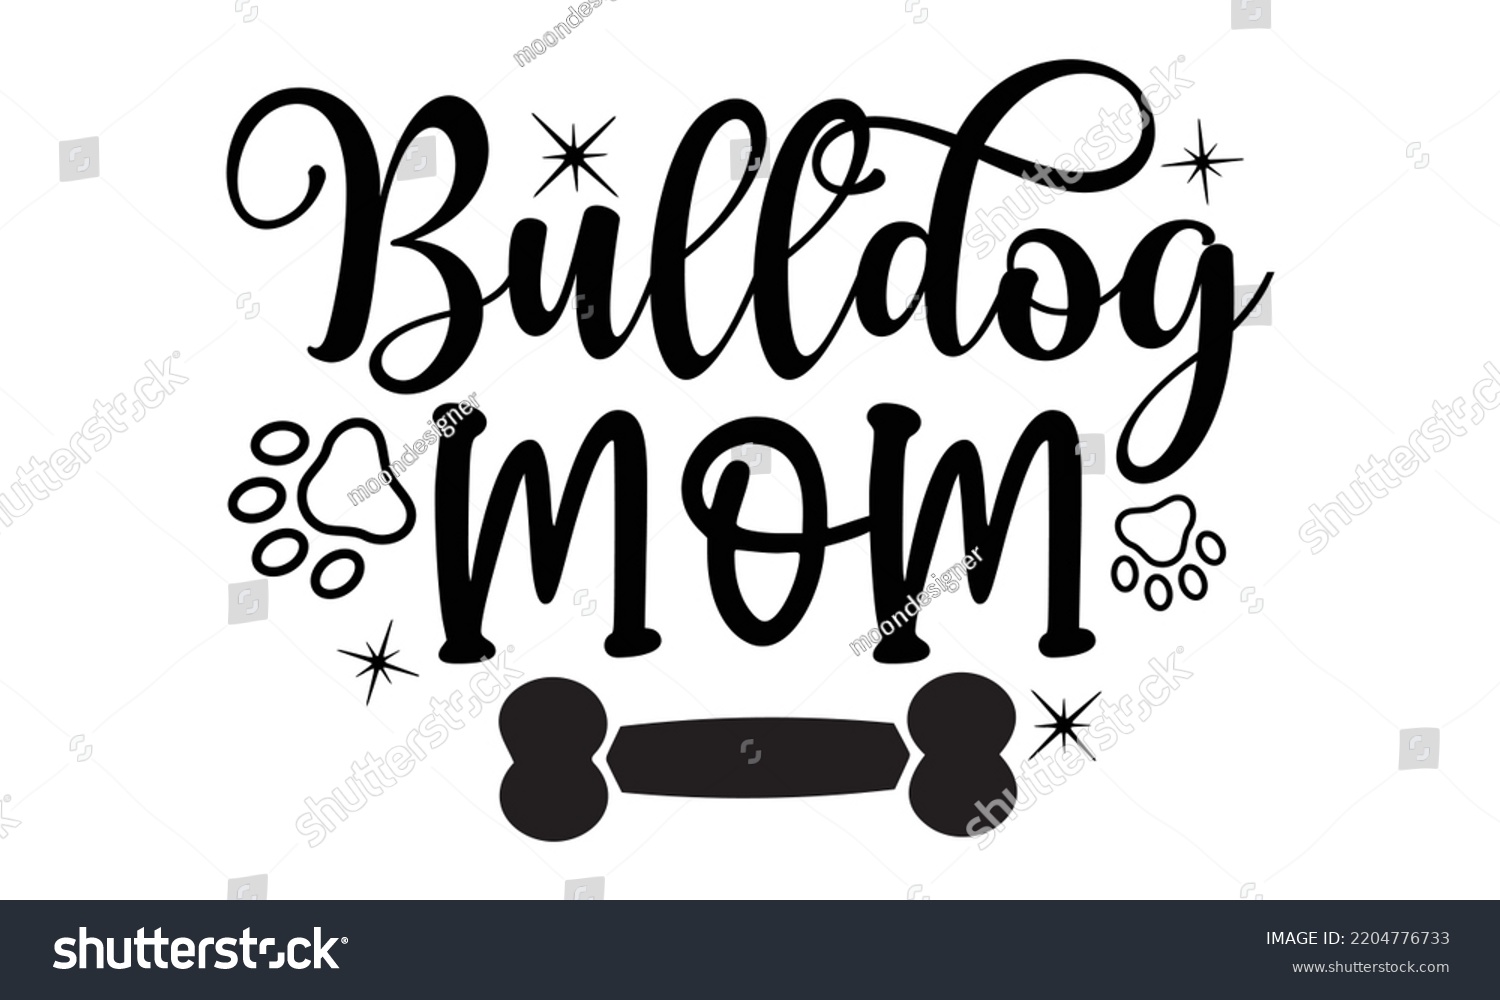 SVG of Bulldog mom - Bullodog T-shirt and SVG Design,  Dog lover t shirt design gift for women, typography design, can you download this Design, svg Files for Cutting and Silhouette EPS, 10 svg